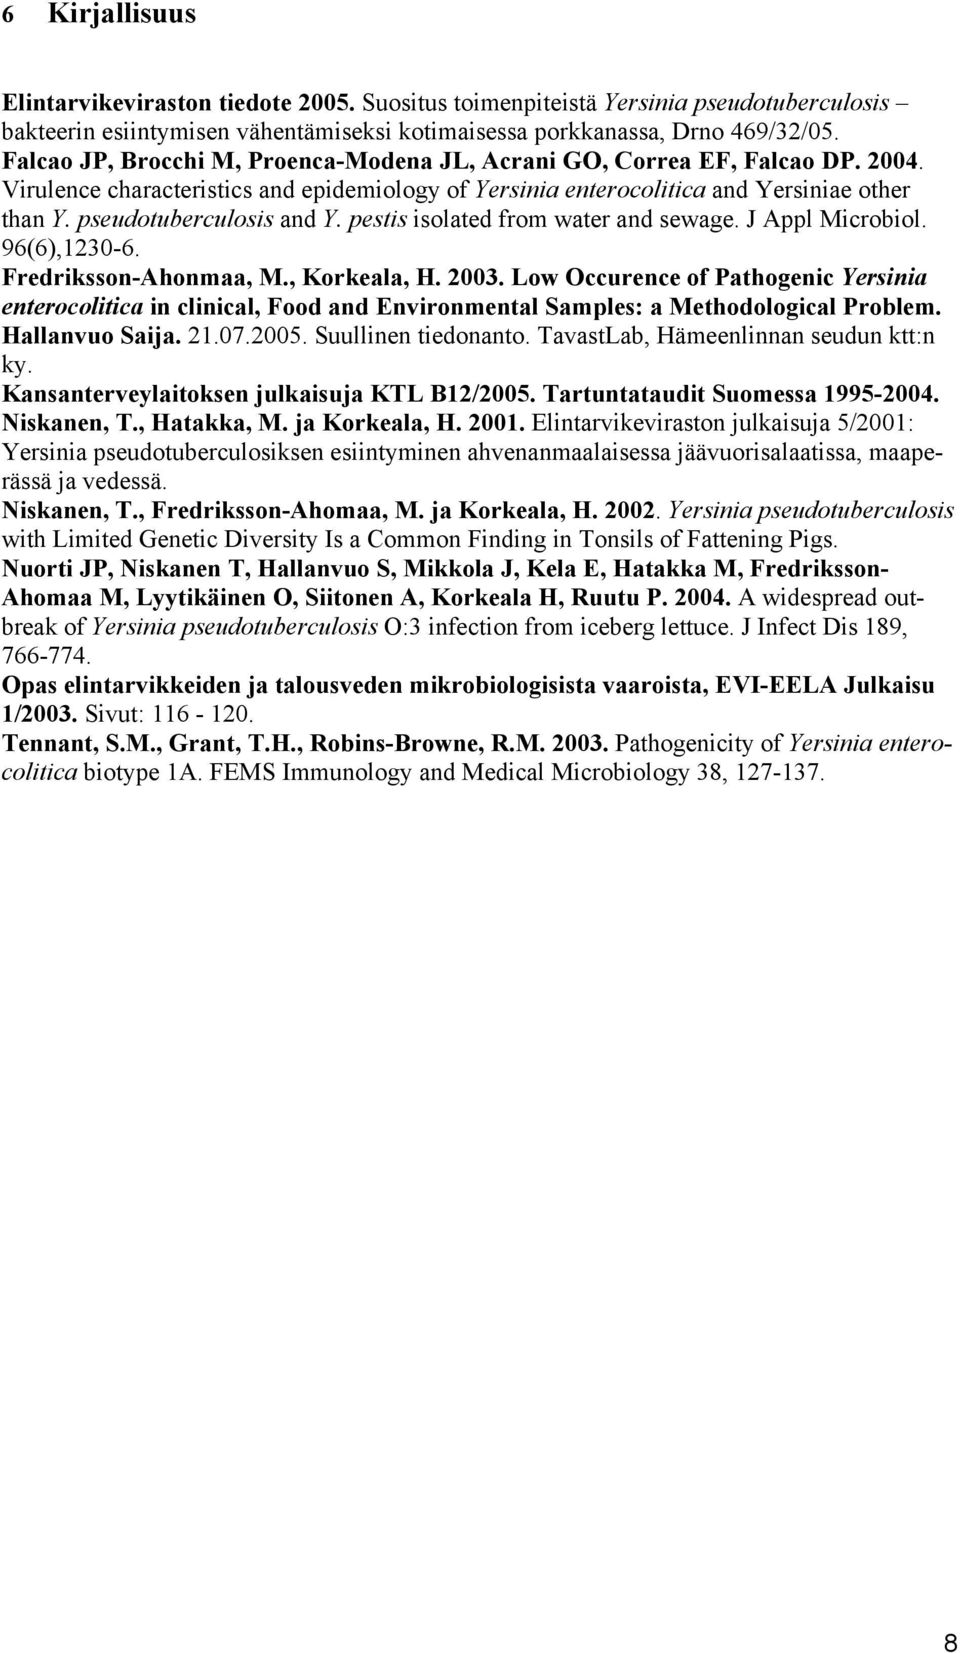 pseudotuberculosis and Y. pestis isolated from water and sewage. J Appl Microbiol. 96(6),1230-6. Fredriksson-Ahonmaa, M., Korkeala, H. 2003.